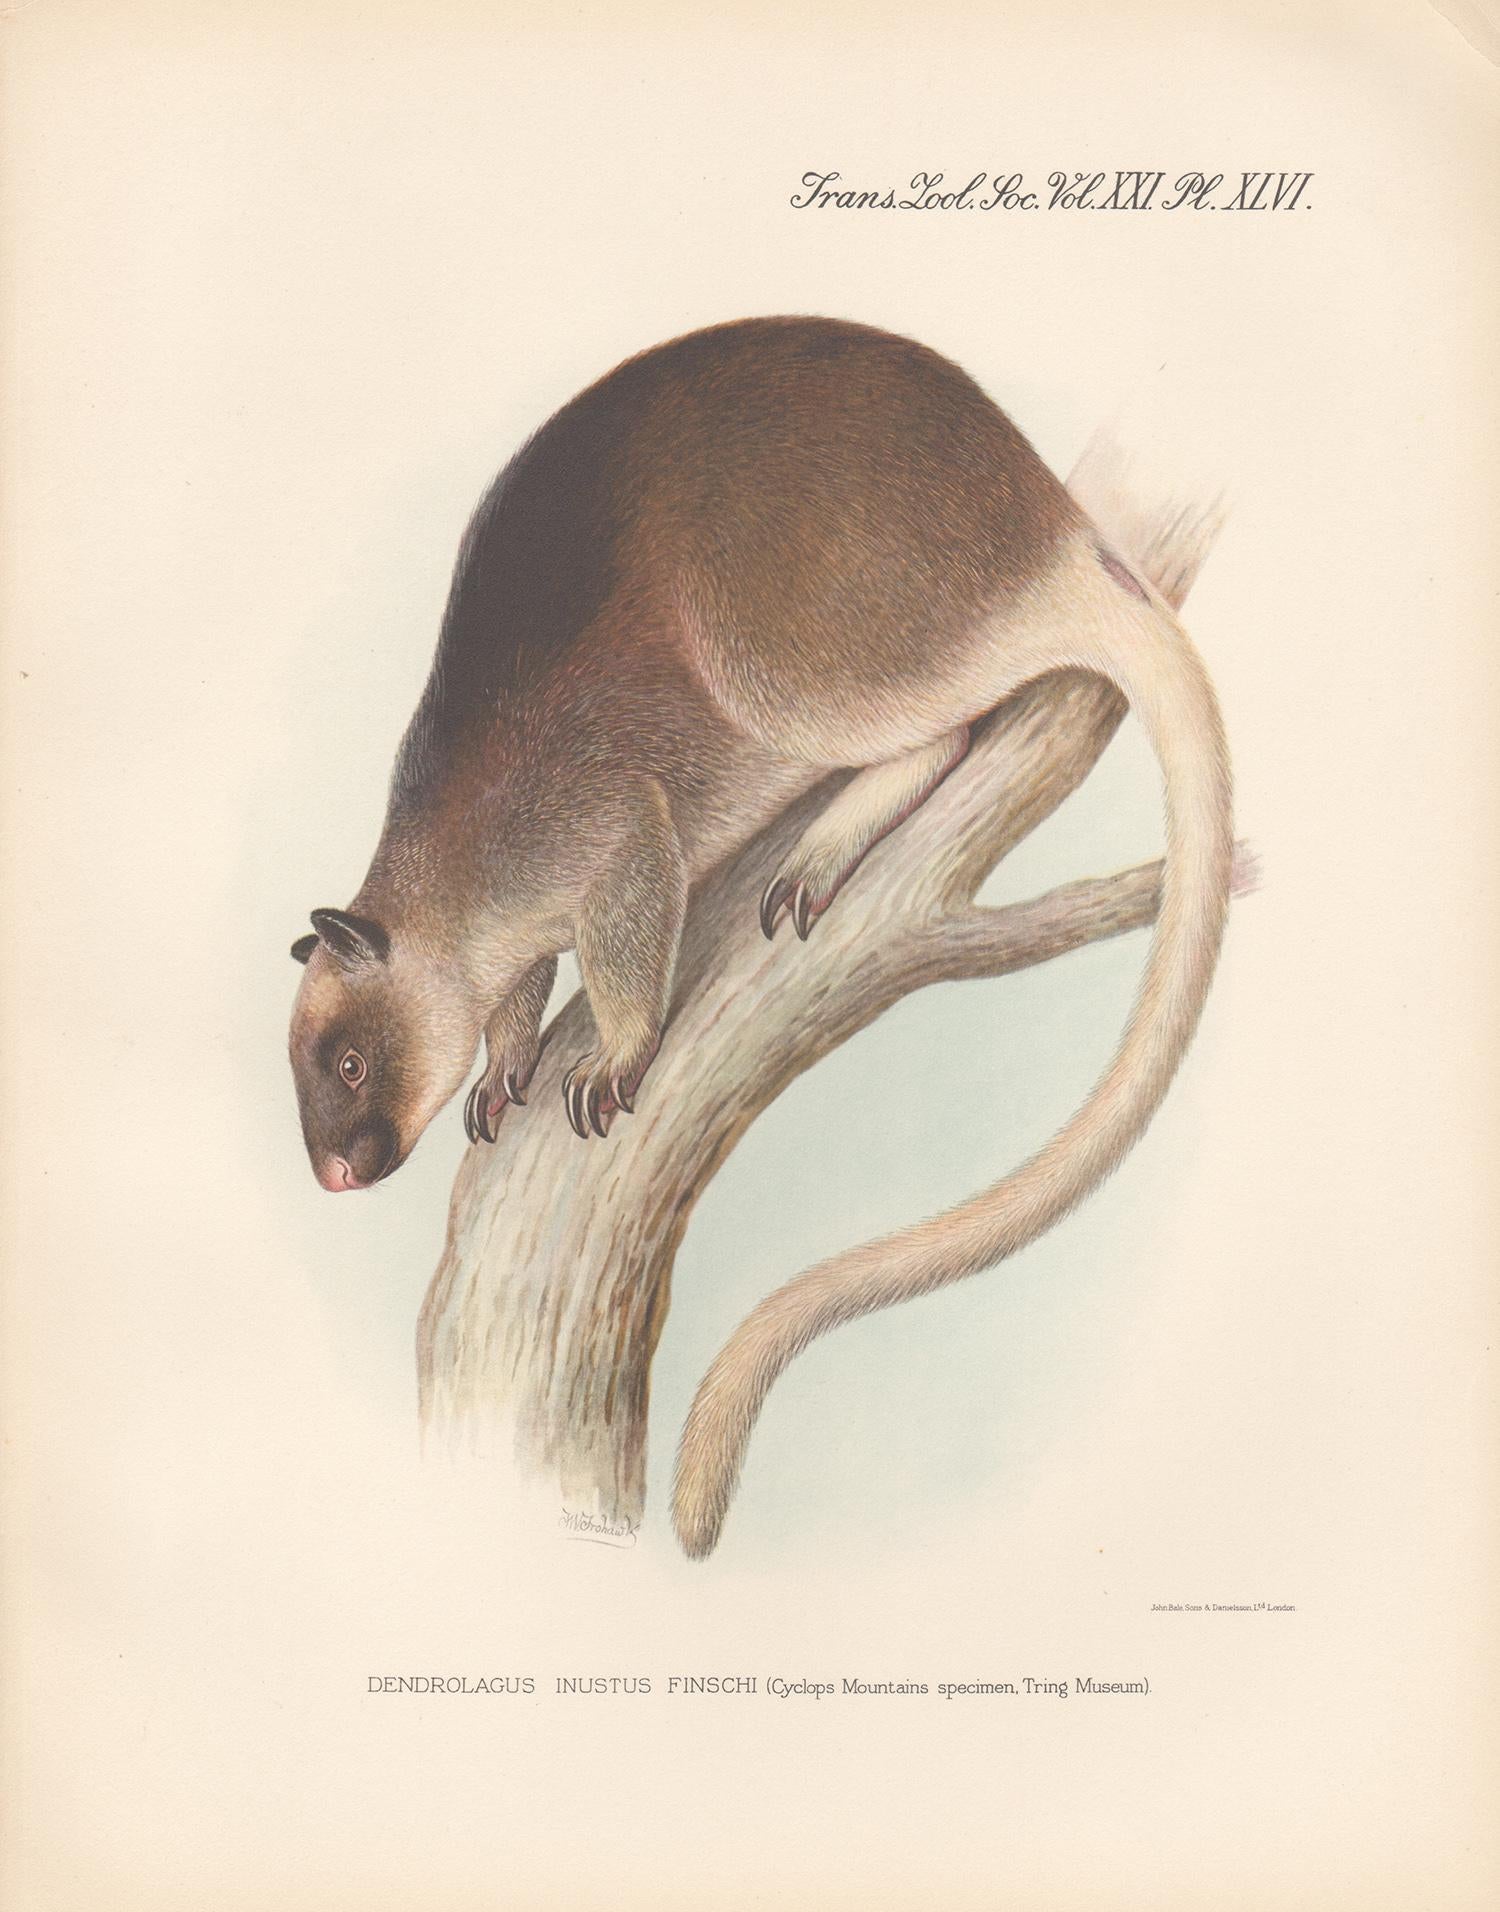 Frederick William Frohawk Animal Print - Finsch's Tree Kangaroo, New Guinea, natural history lithograph, 1936